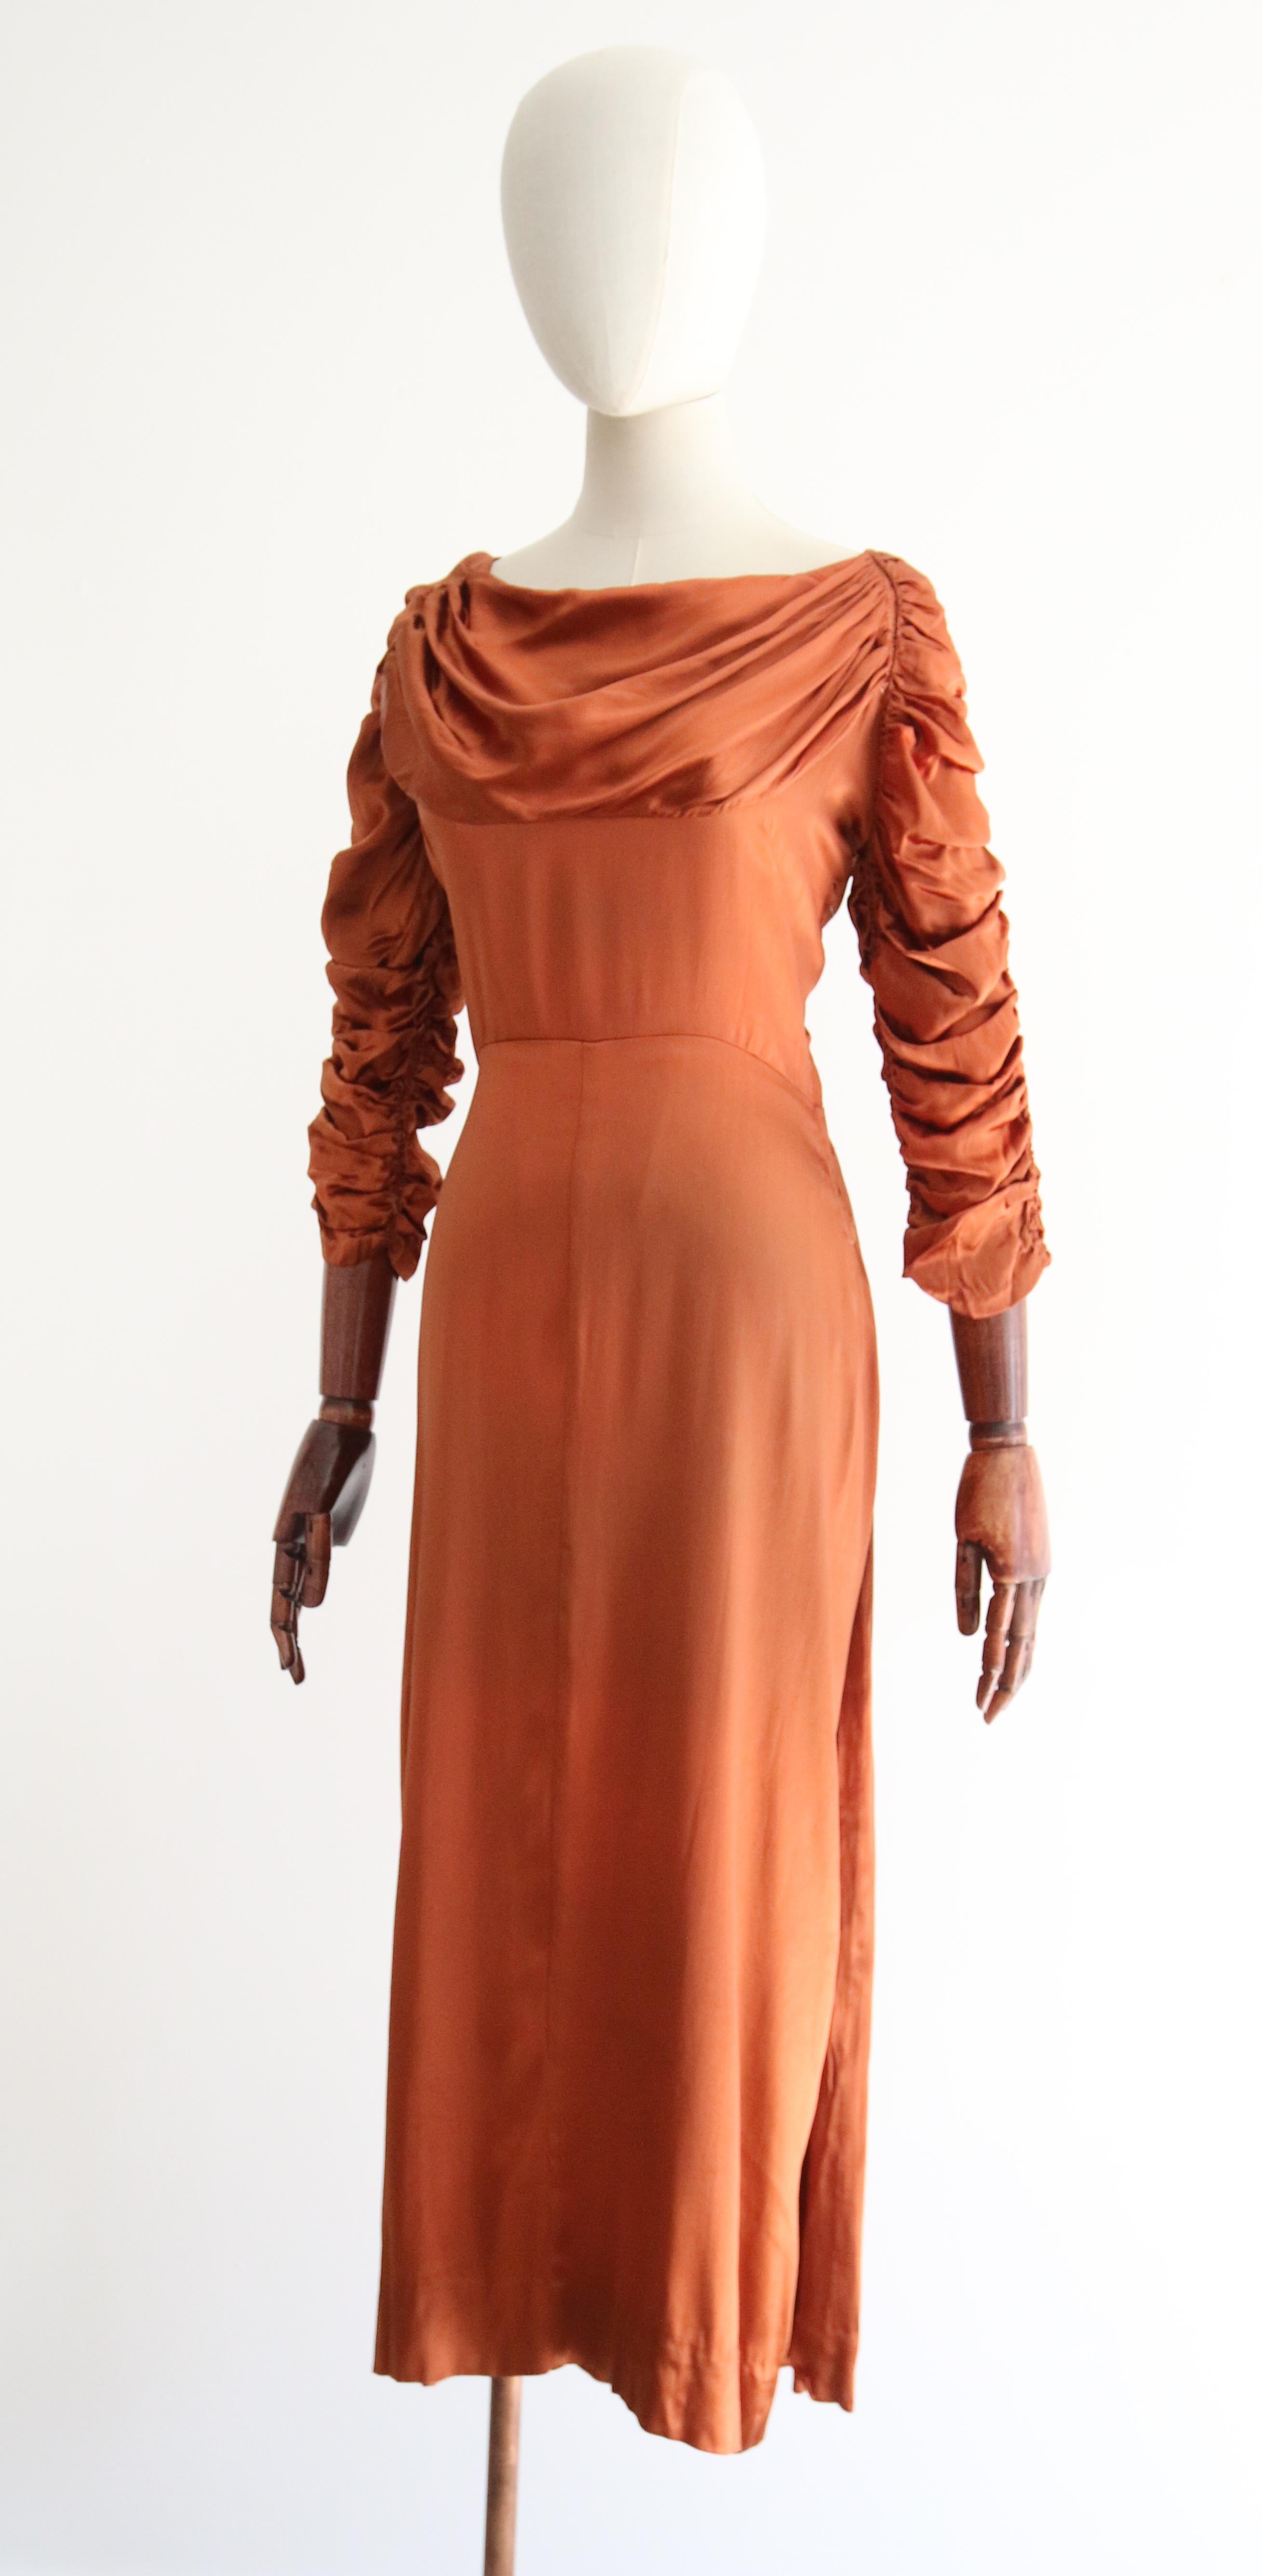 Vintage 1930's Pleated & Ruched Amber Satin Dress UK 10 US 6 For Sale 3